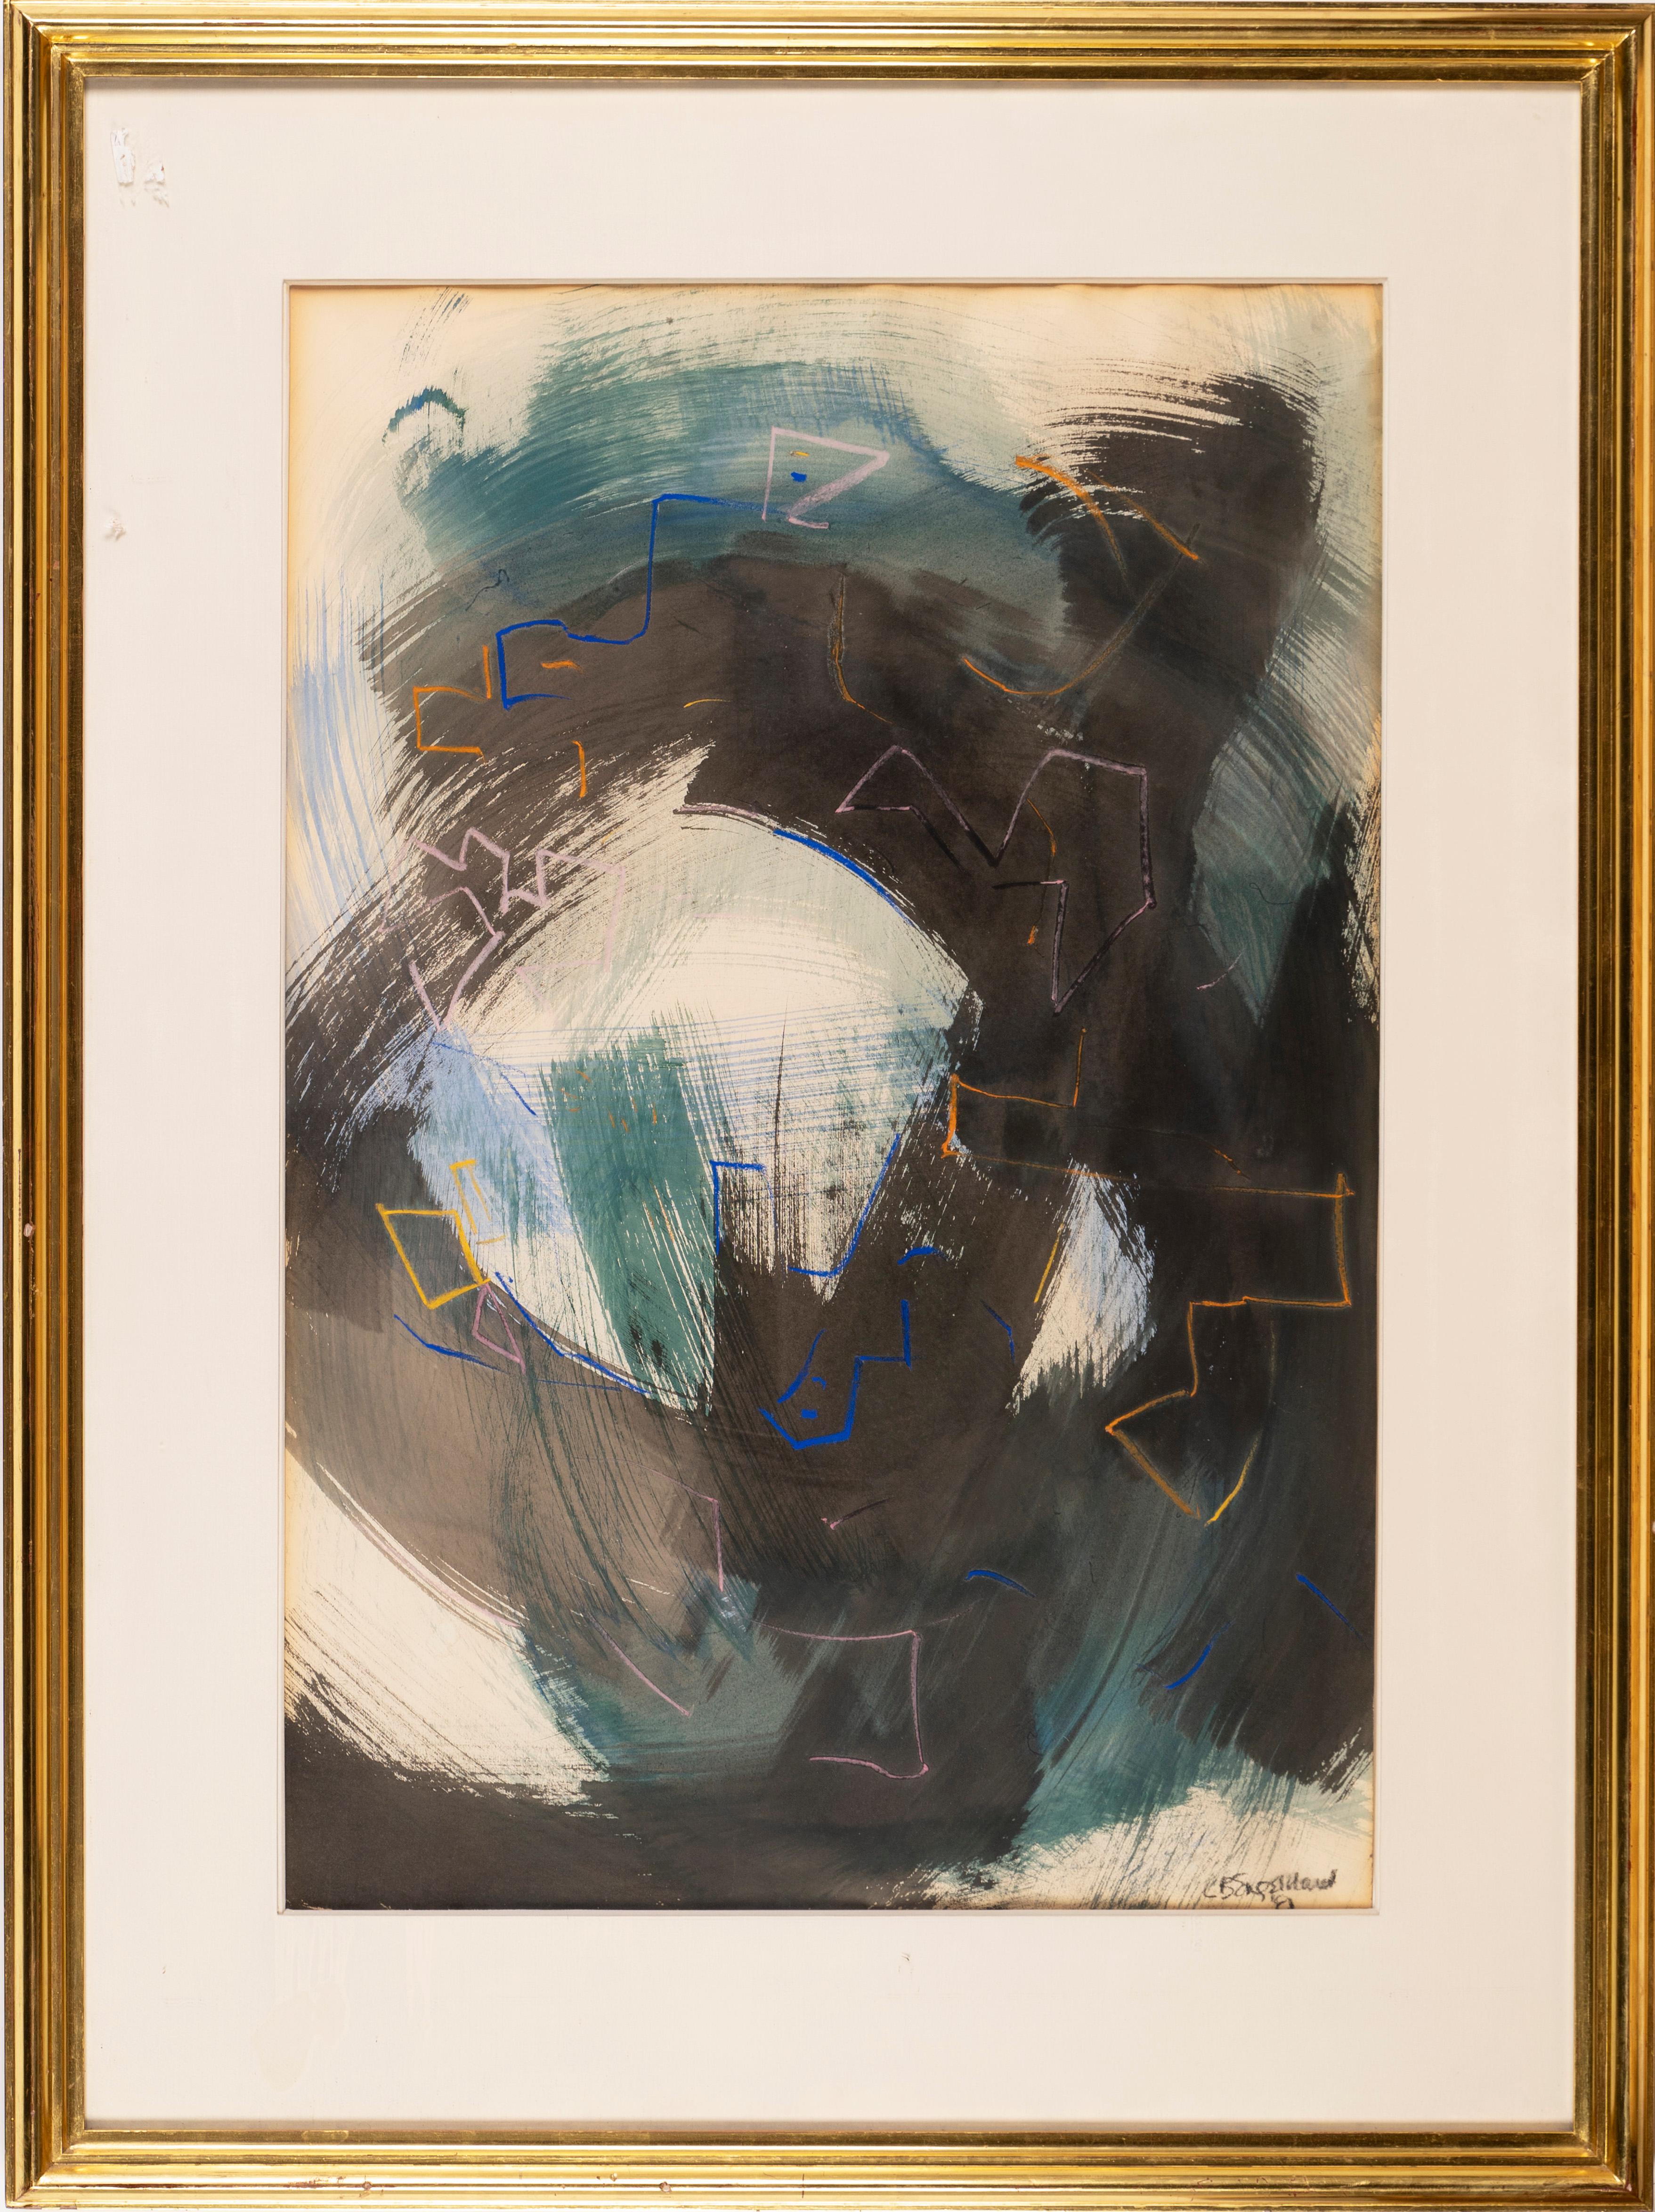 Vintage American modernist abstract painting.  Watercolor and gouache on paper, circa 1950.  Signed.  Image size, 23L x 35H.  Housed in a period giltwood frame.
